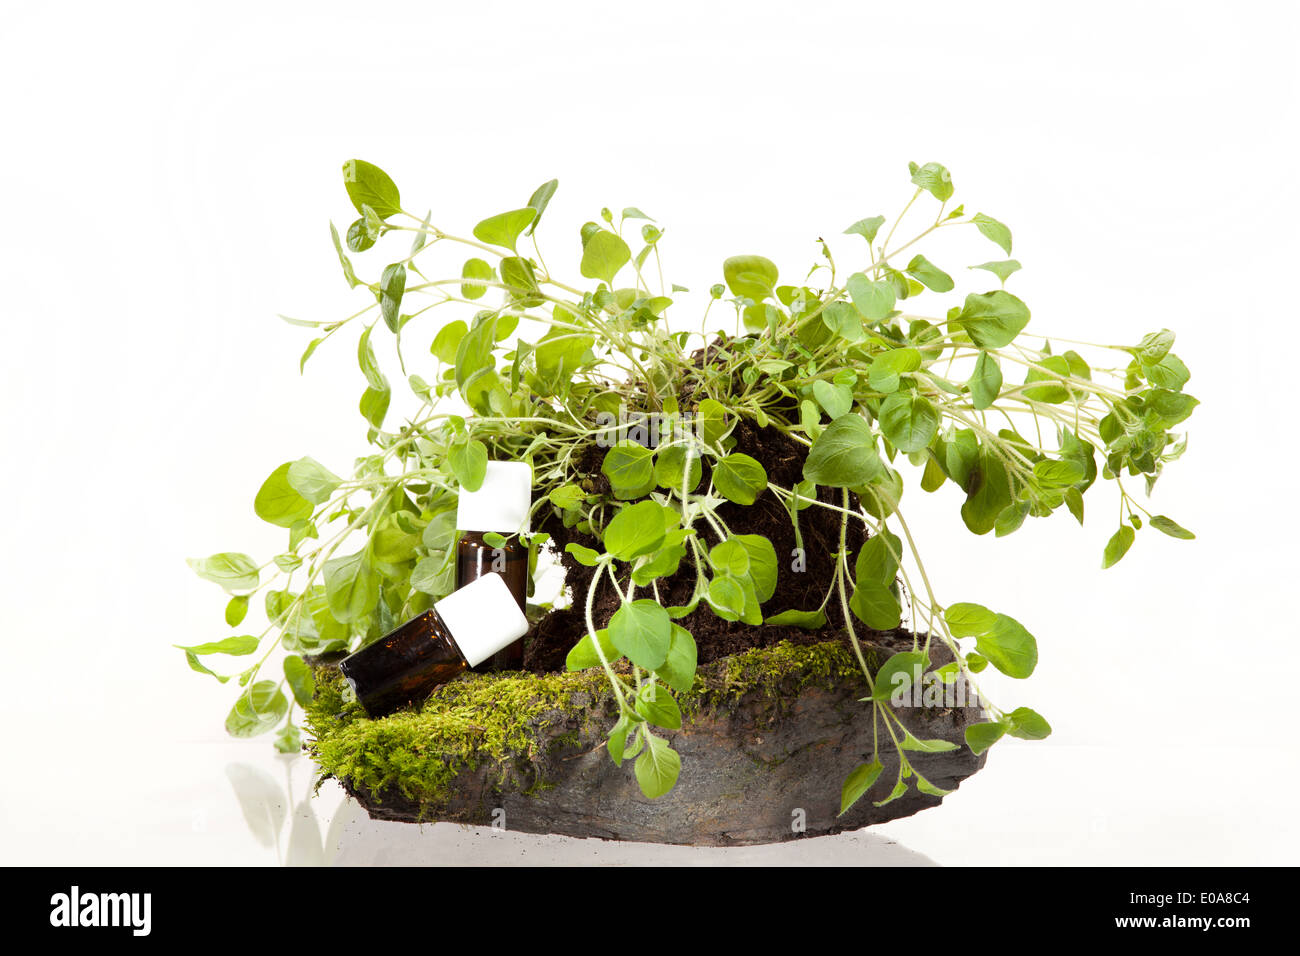 Essential oil of herbs for use in aromatherapy Stock Photo